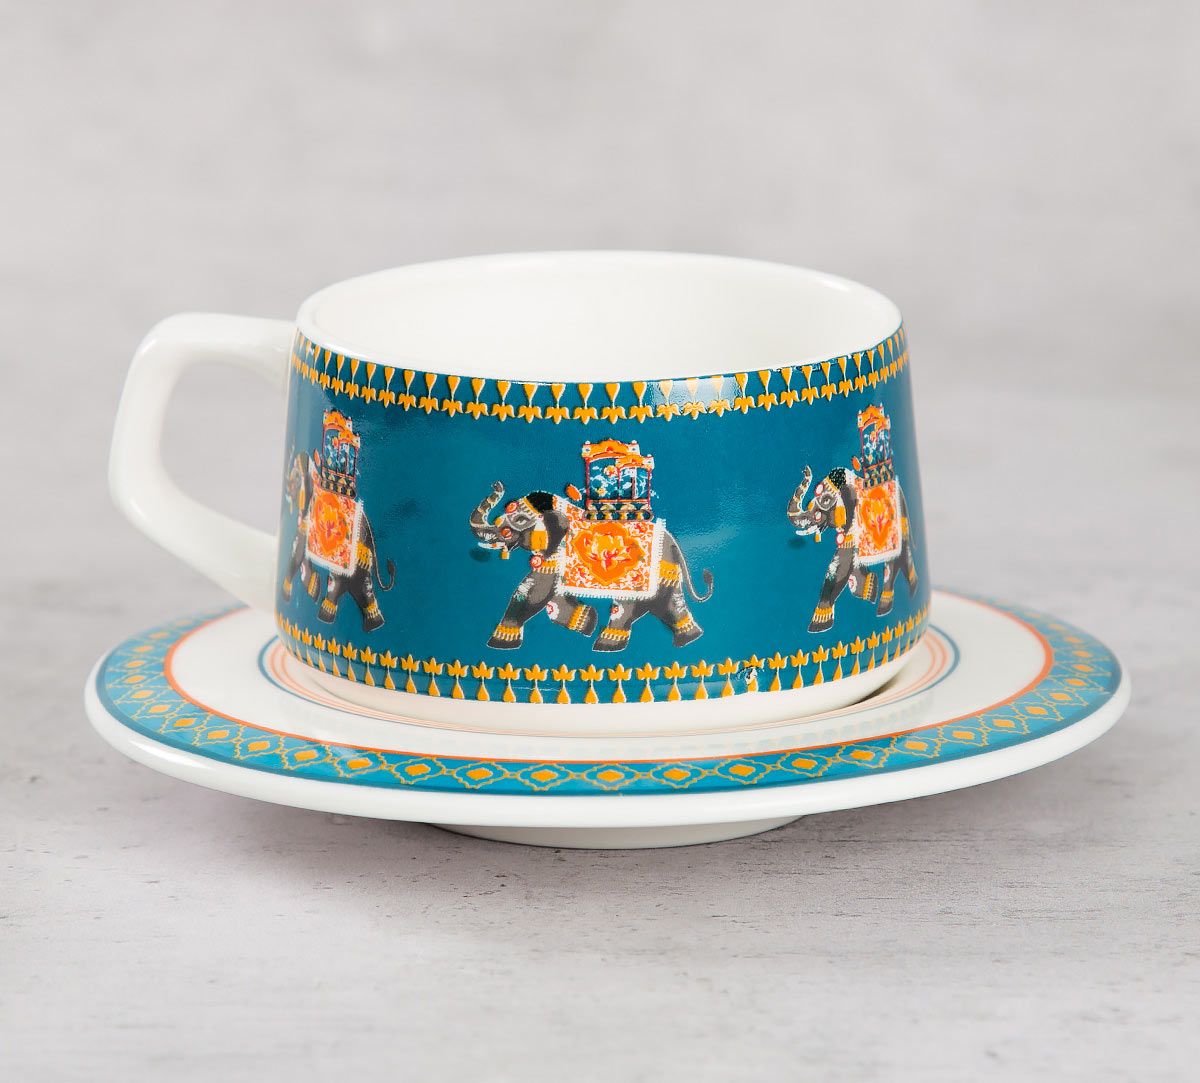 Shop for affordable teacup sets online | India Circus